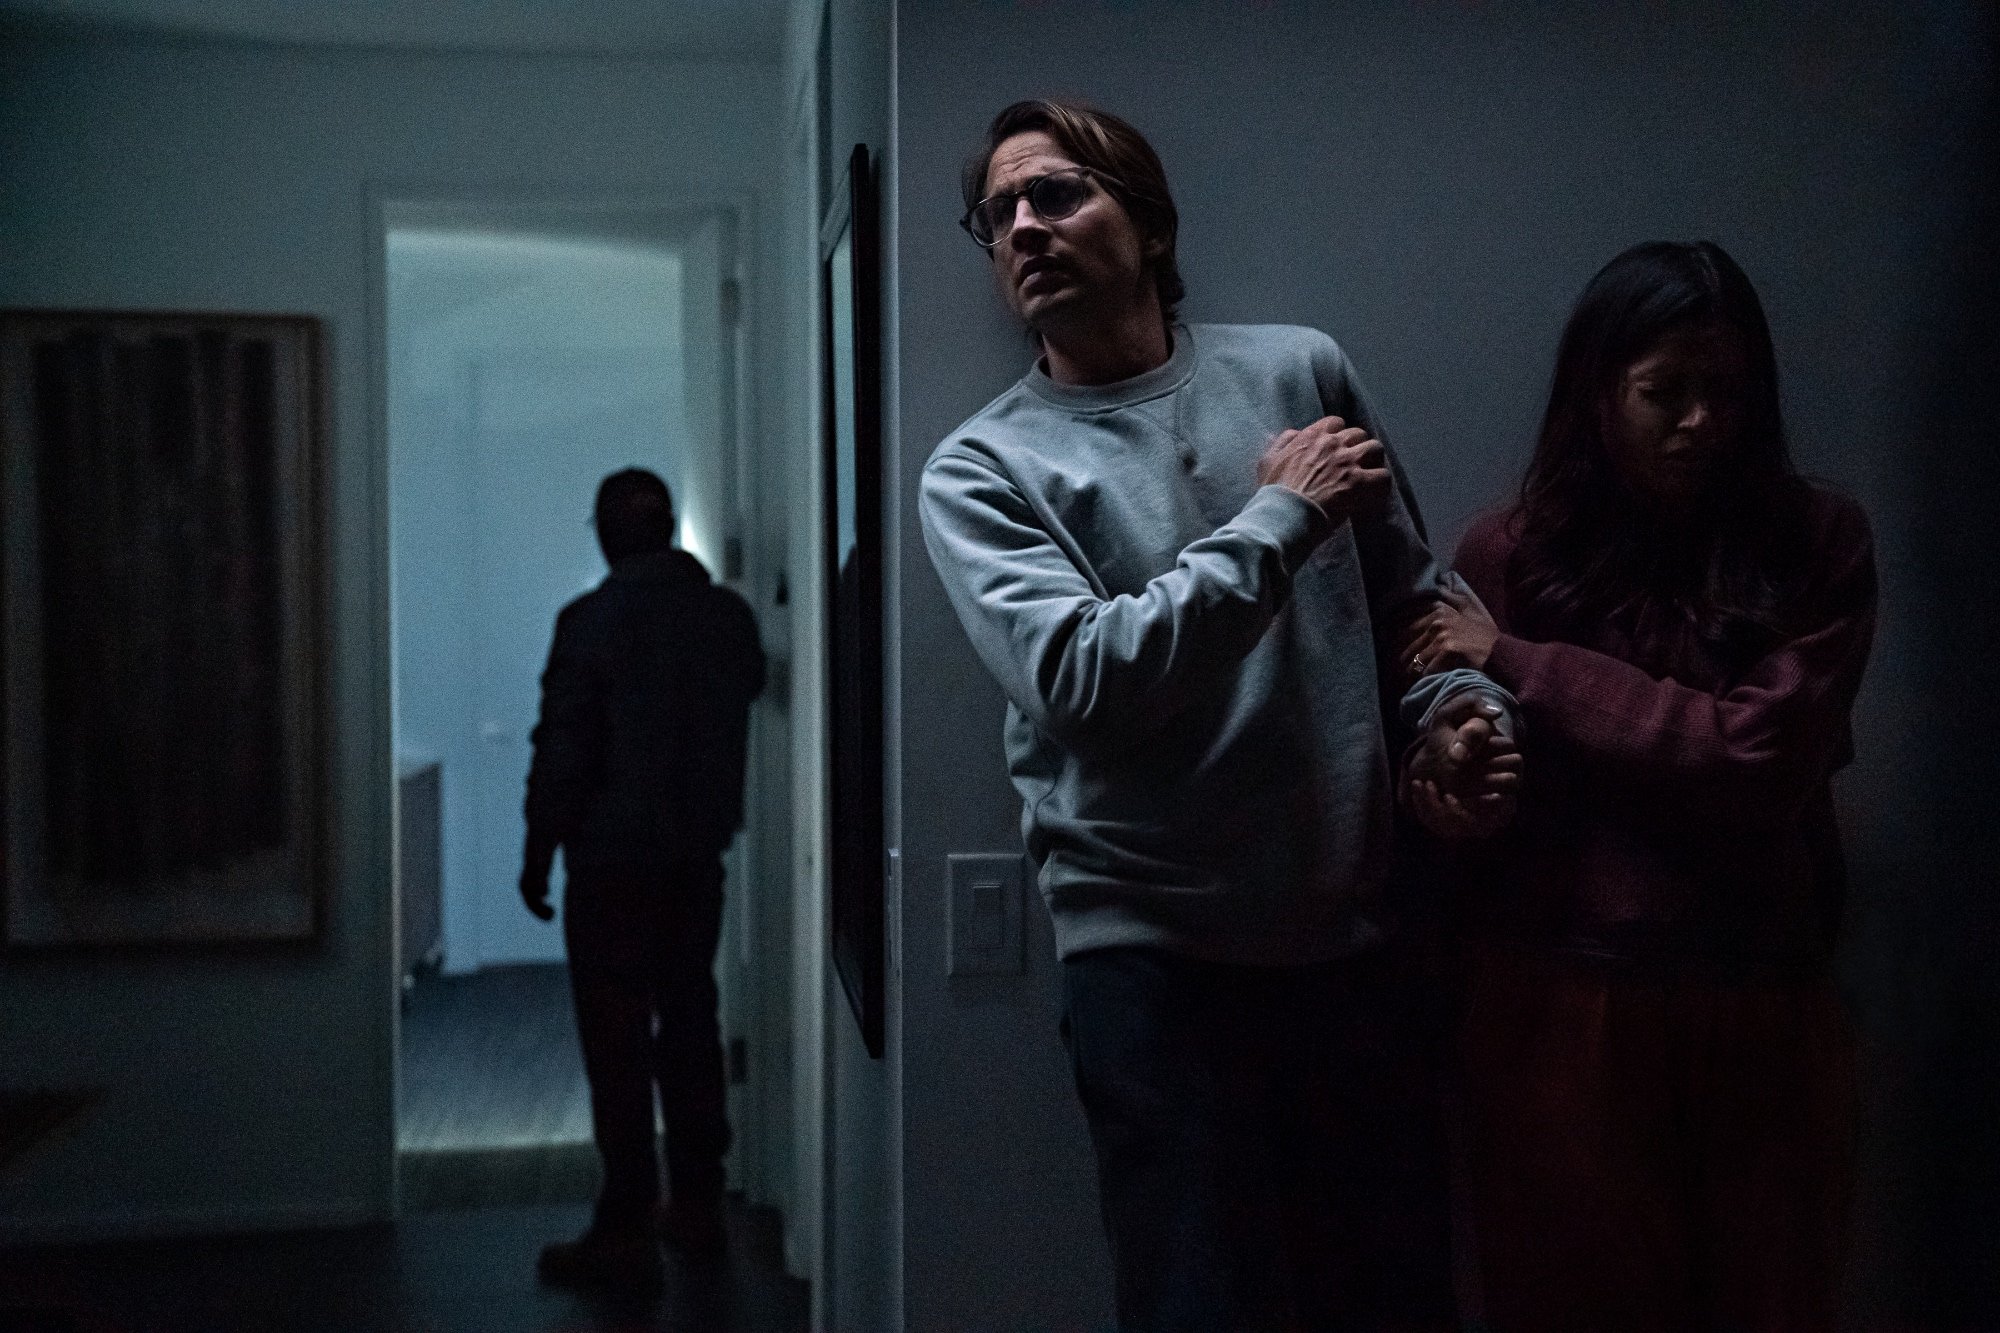 'Intrusion' stars Logan Marshall-Green as Henry and Freida Pinto as Meera hiding behind a wall from an intruder